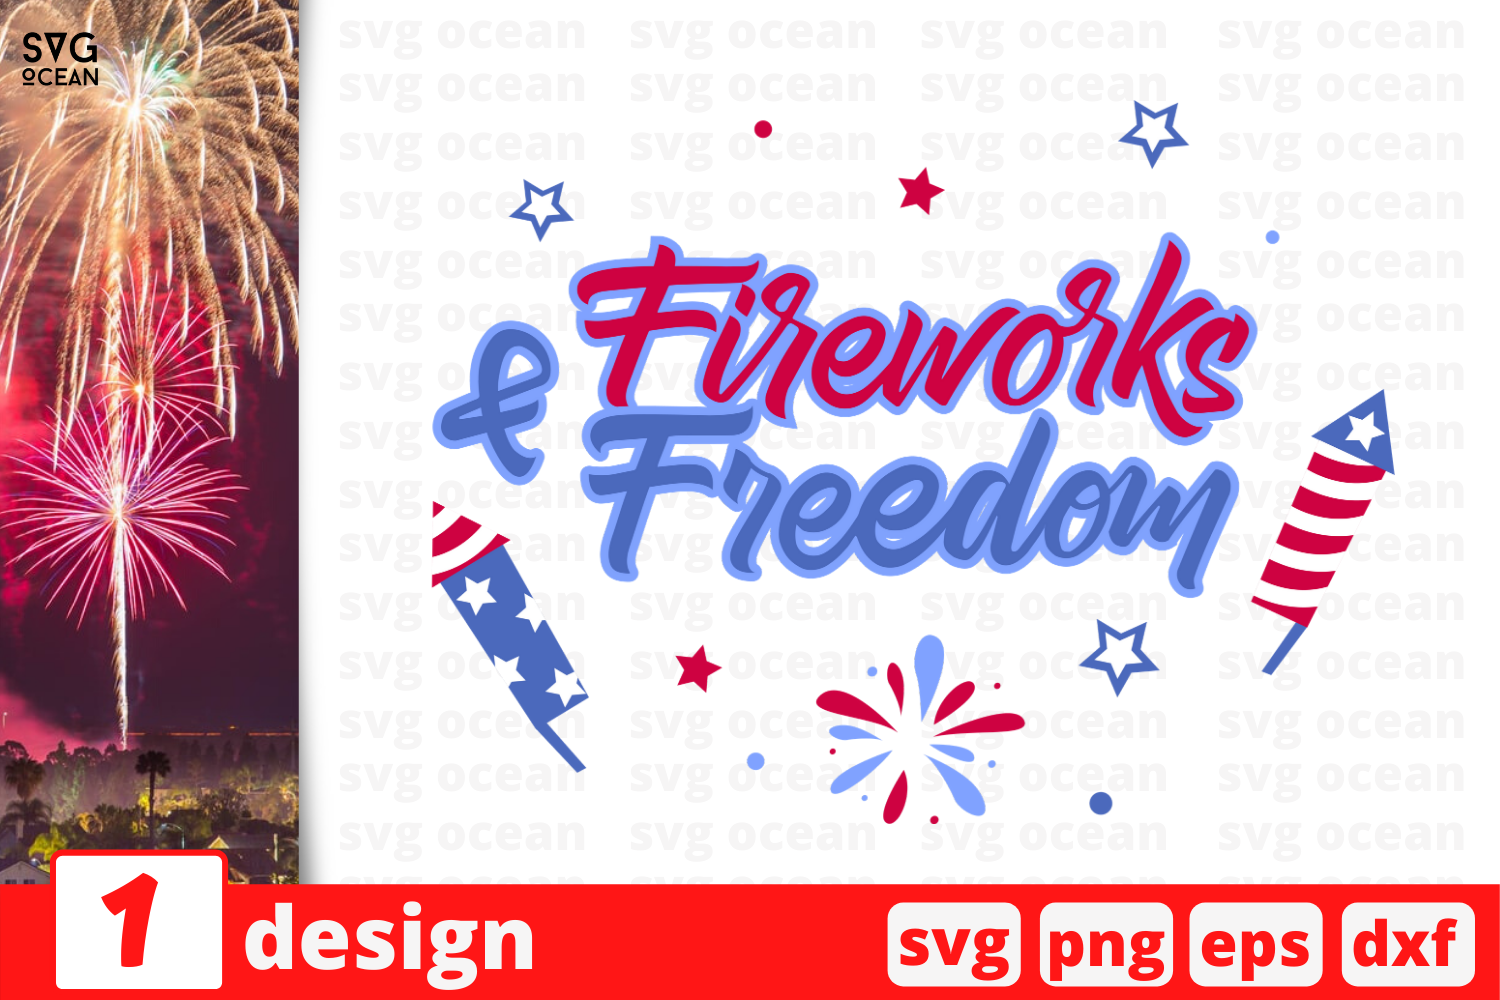 1 Fireworks And Freedom Svg Bundle Quotes Cricut Svg By Svgocean Thehungryjpeg Com